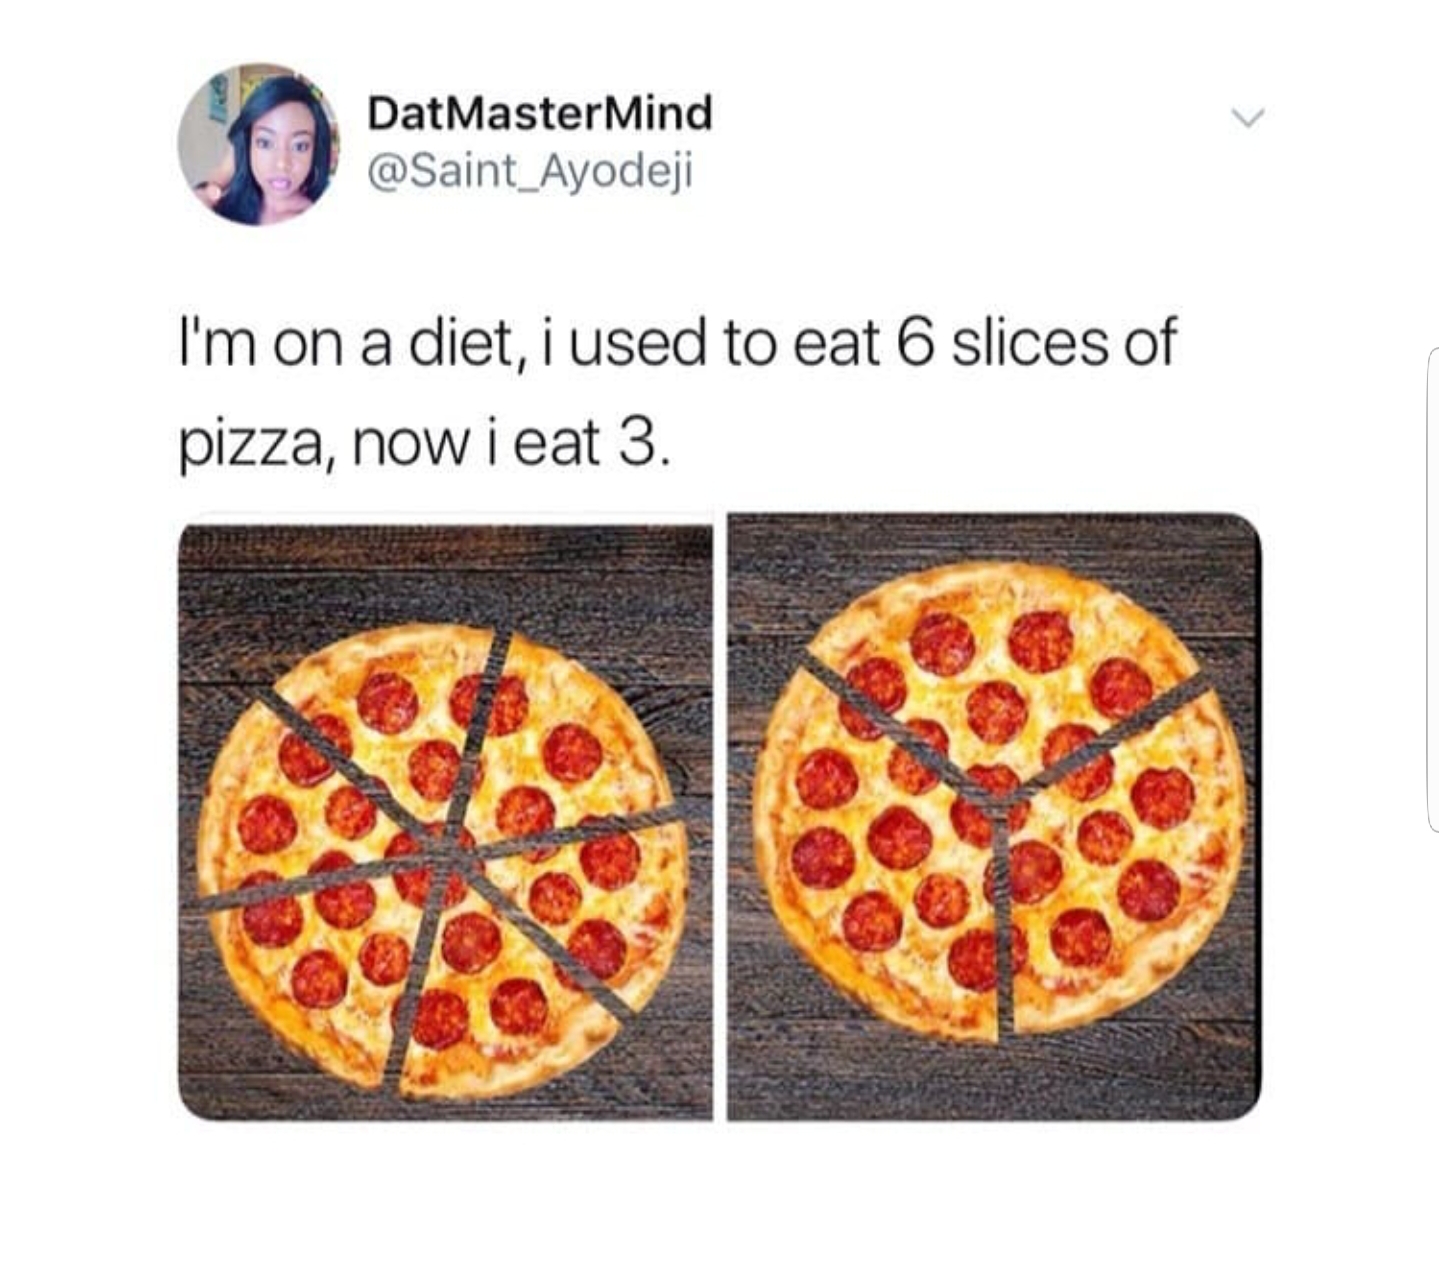 cut a pizza into 6 - DatMasterMind I'm on a diet, i used to eat 6 slices of pizza, now i eat 3.